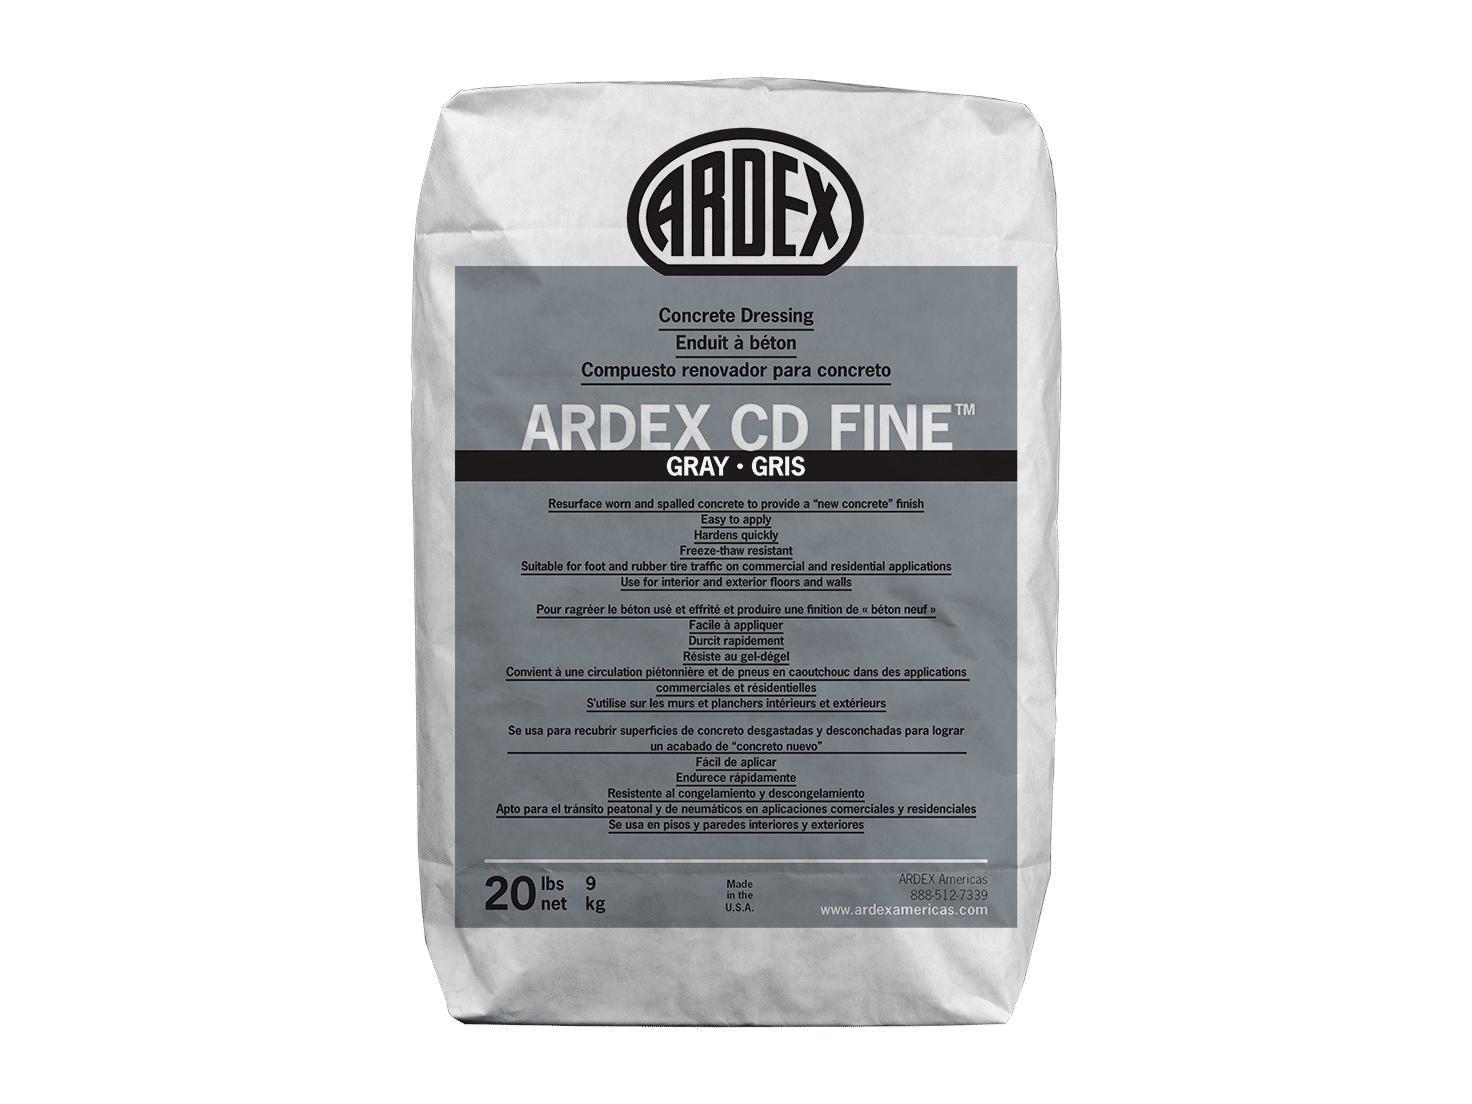 Ardex (11960) product